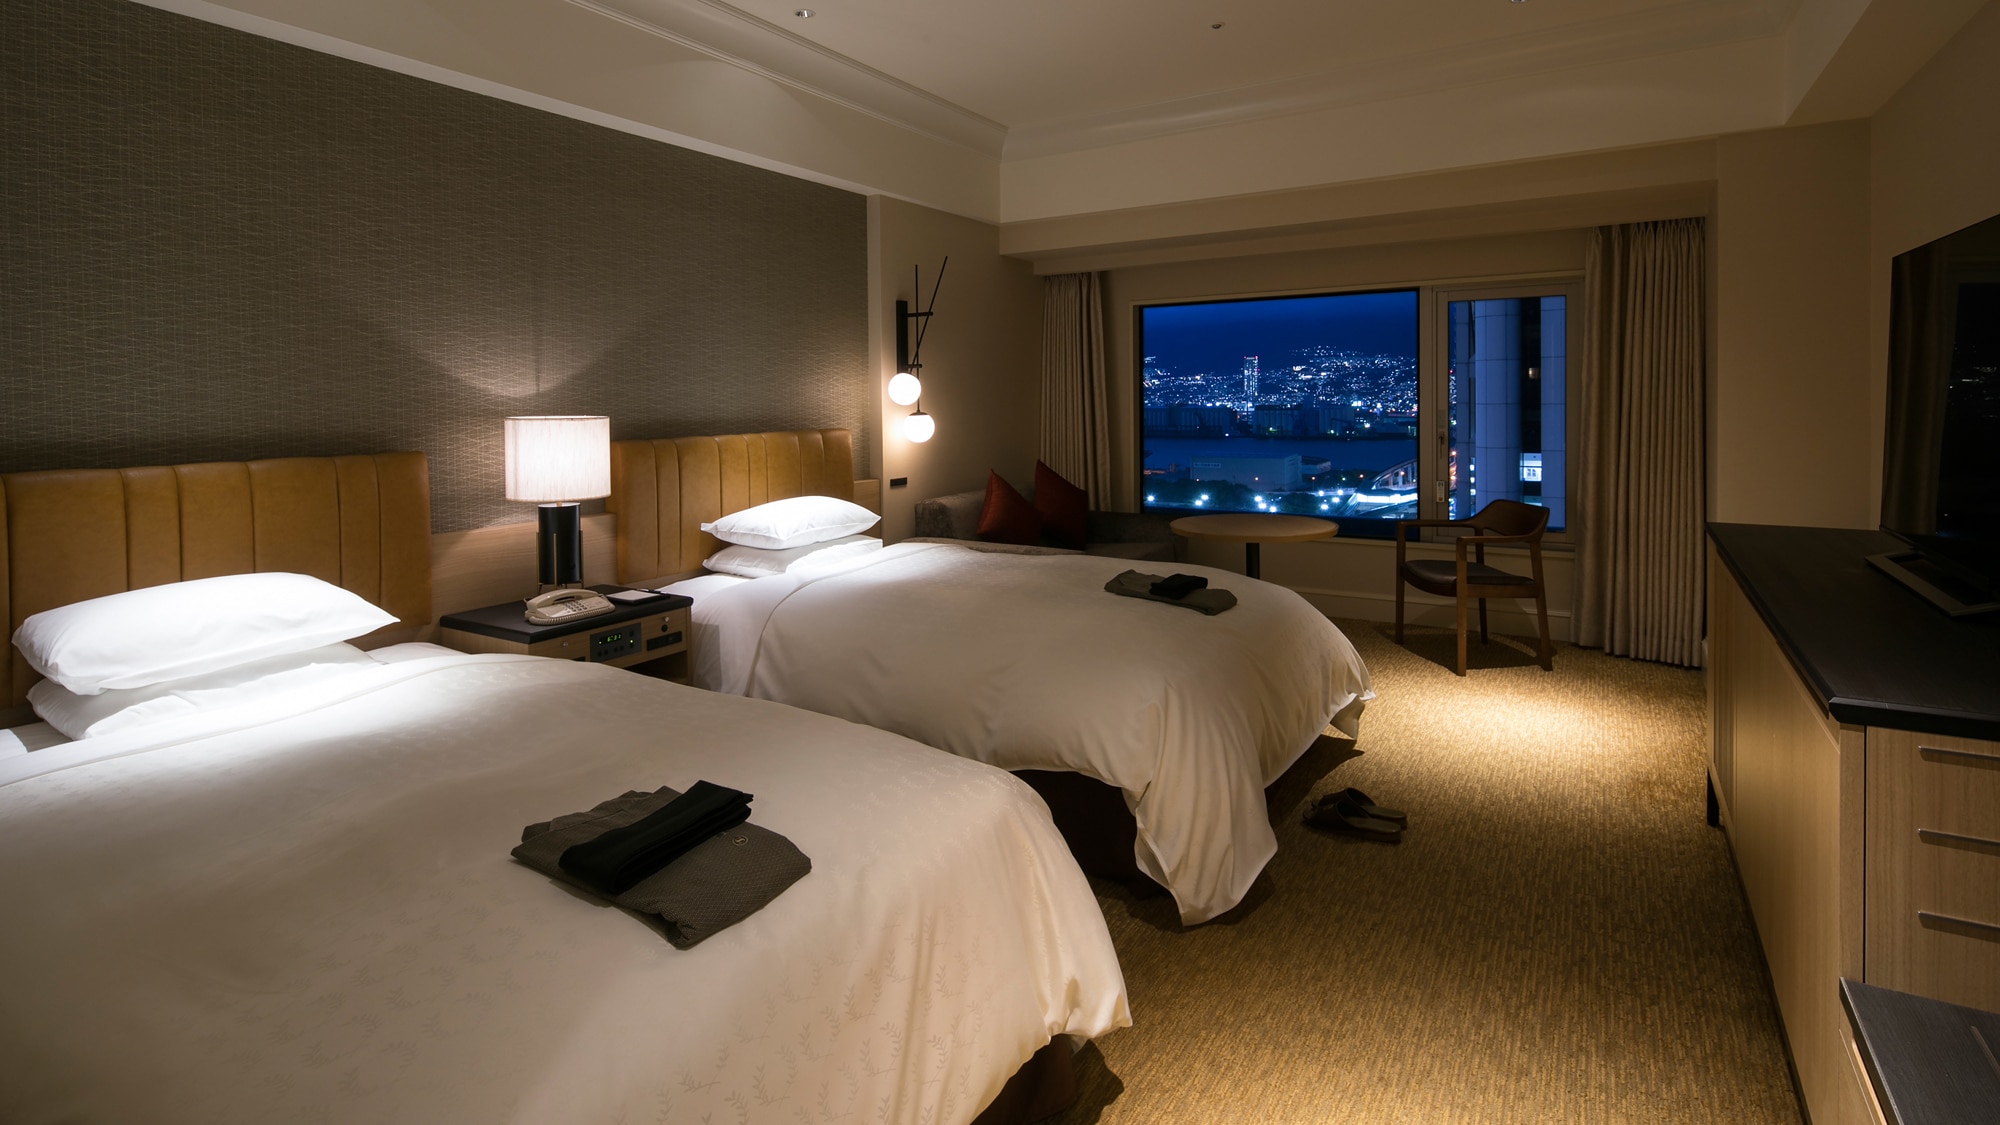 [Preferred Deluxe Twin] 36 square meters, 14-16th floor, Mt. Rokko side. Enjoy the view from the upper floors